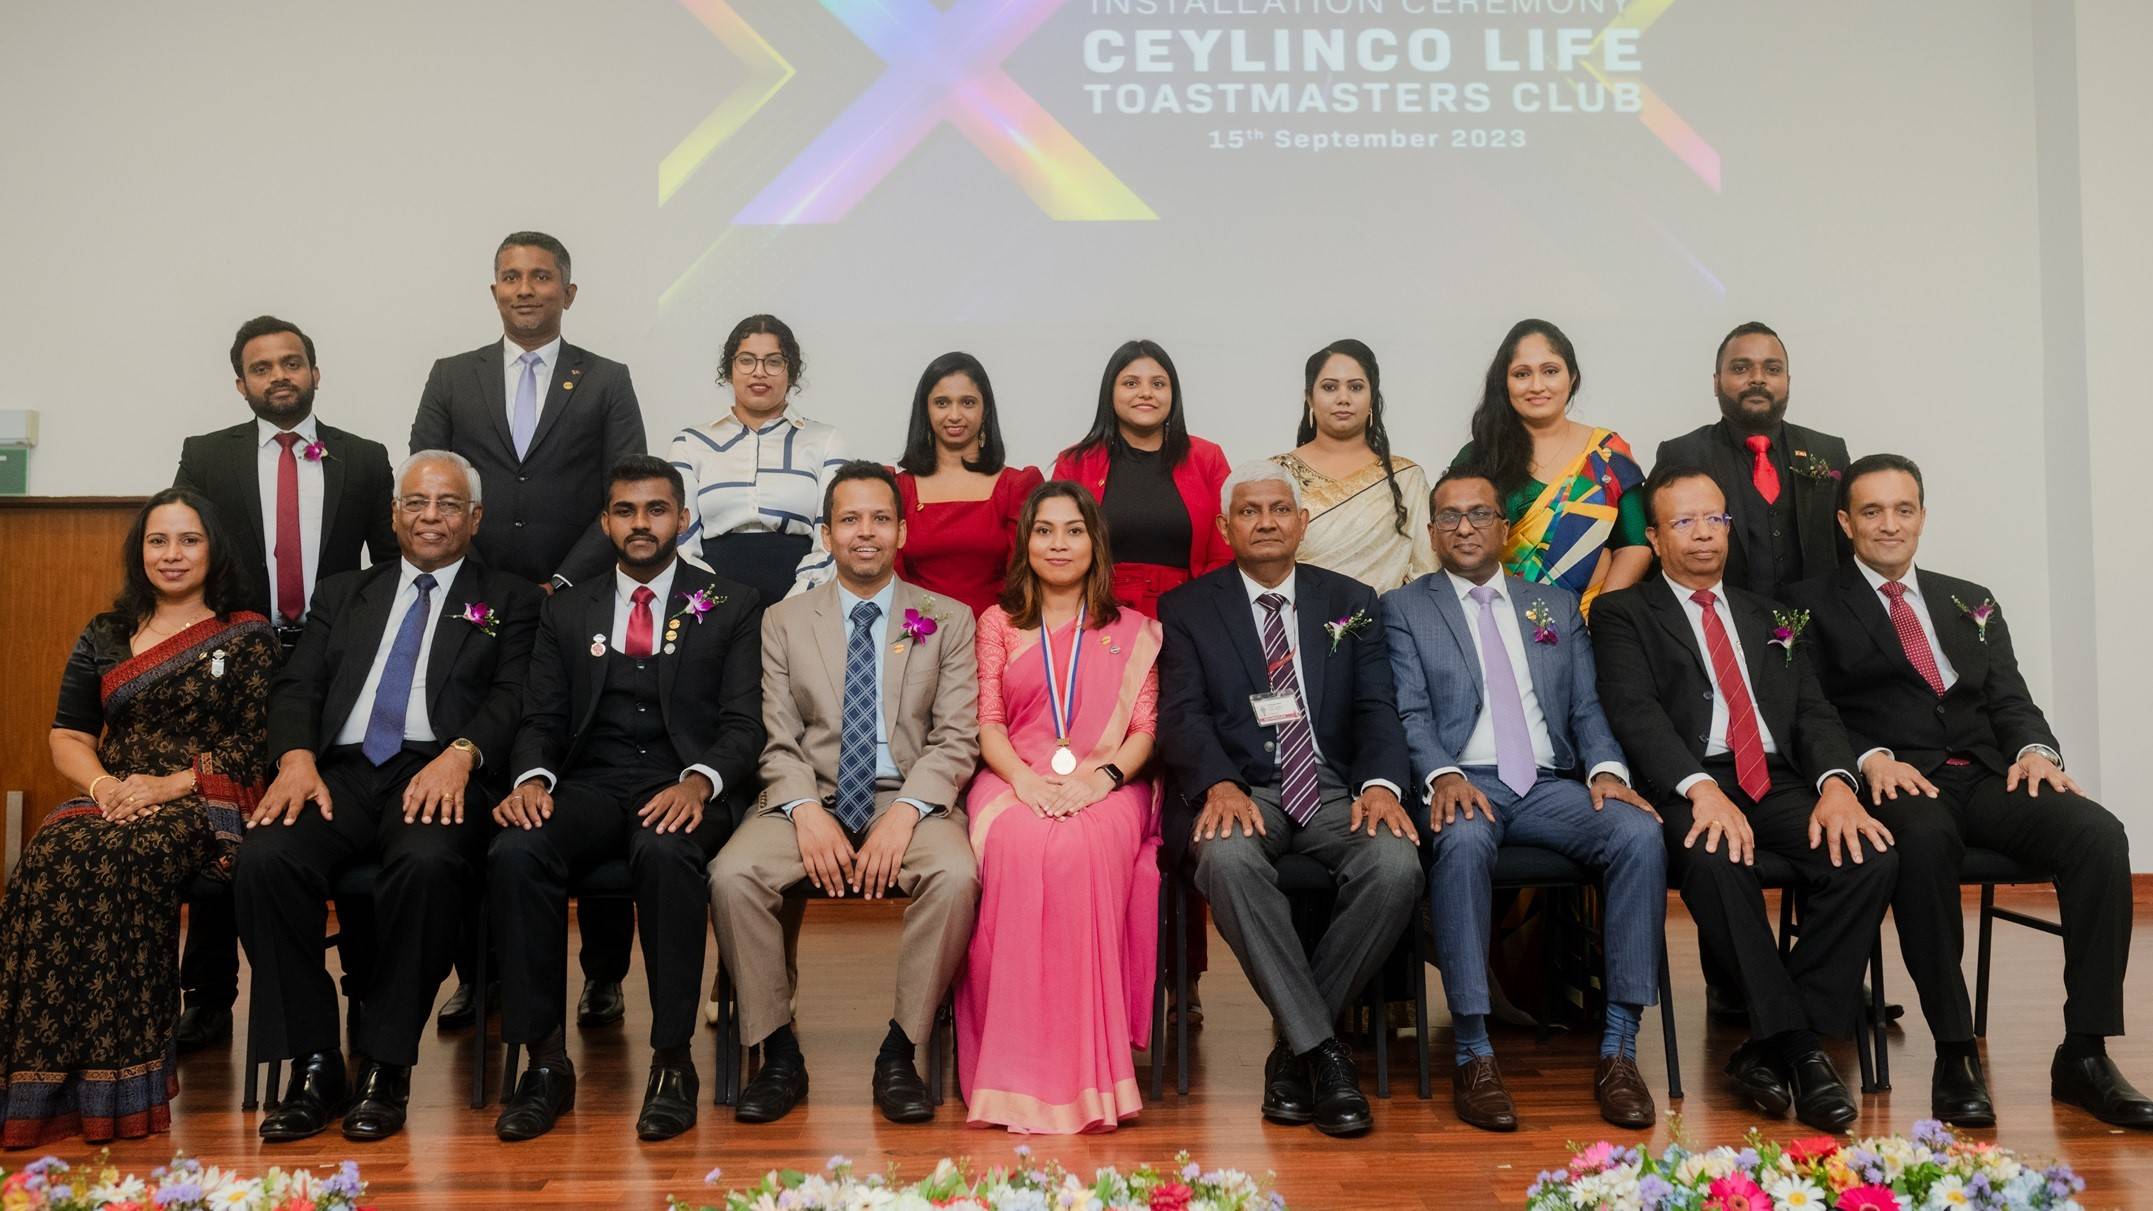 You are currently viewing Ceylinco Life Toastmasters Club Celebrates A Decade of Excellence at the 10th Annual Installation Ceremony.